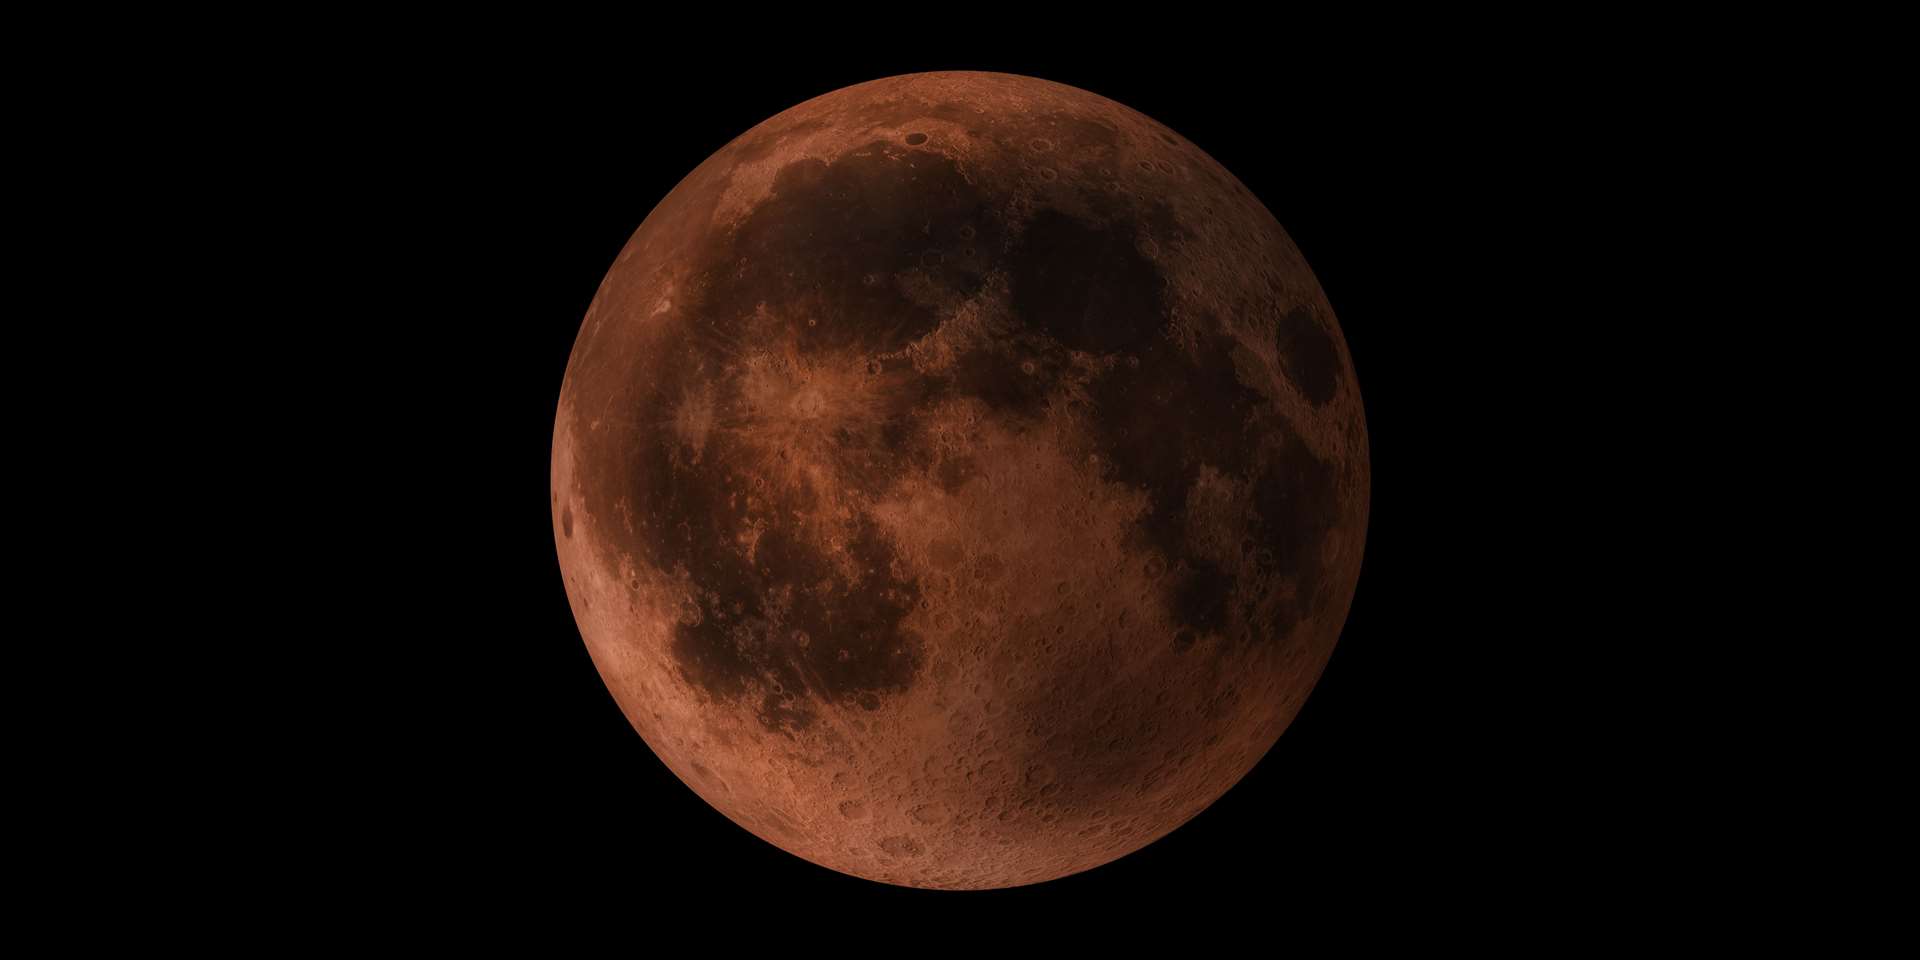 The moon is expected to experience a colour change from about 6am tomorrow